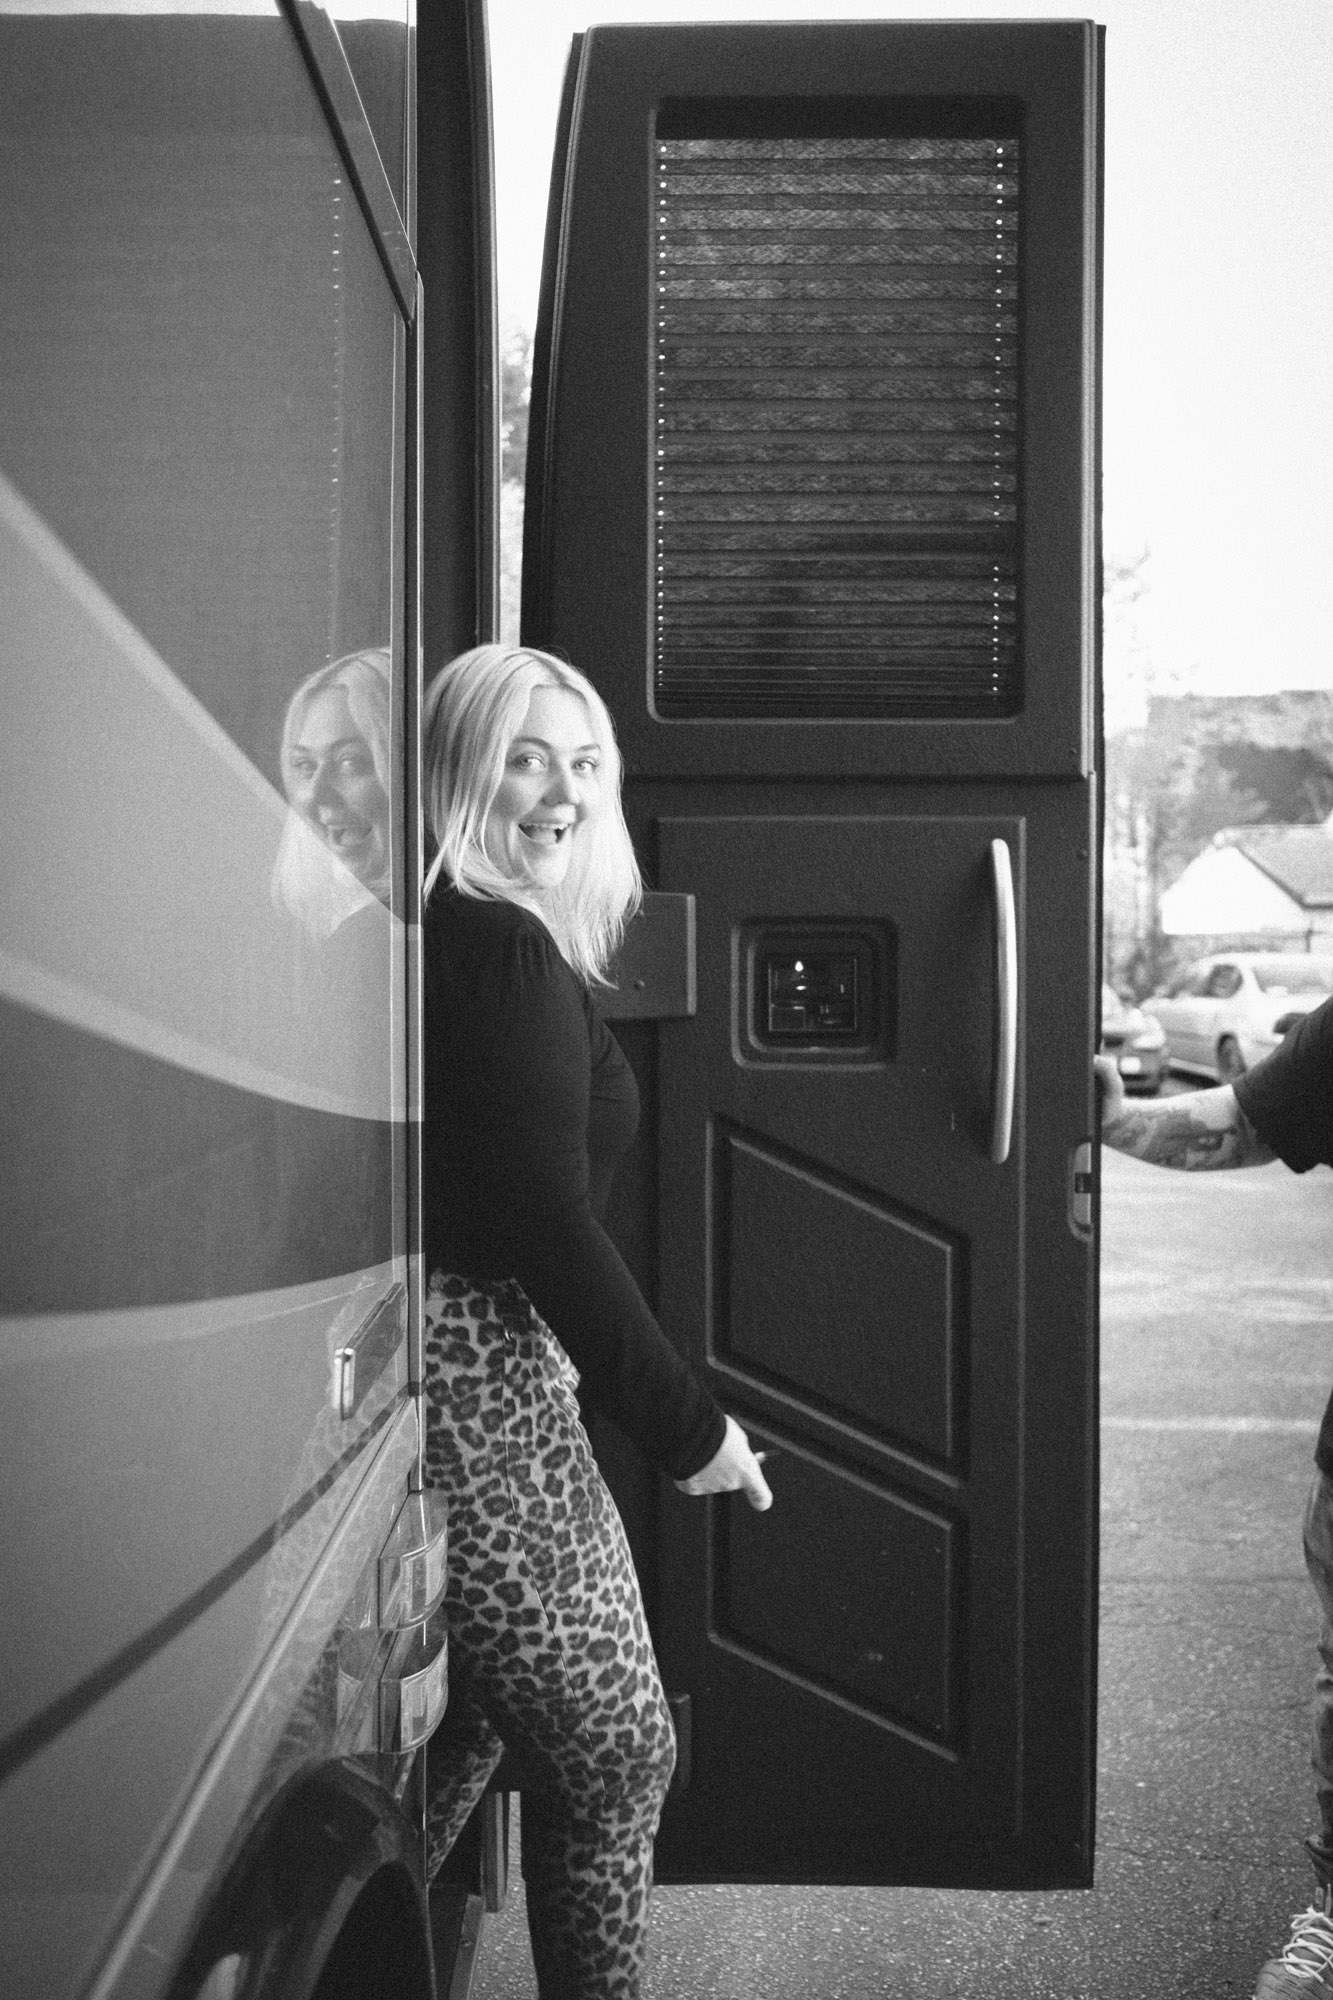 On the Road with Elle King and The Brethren